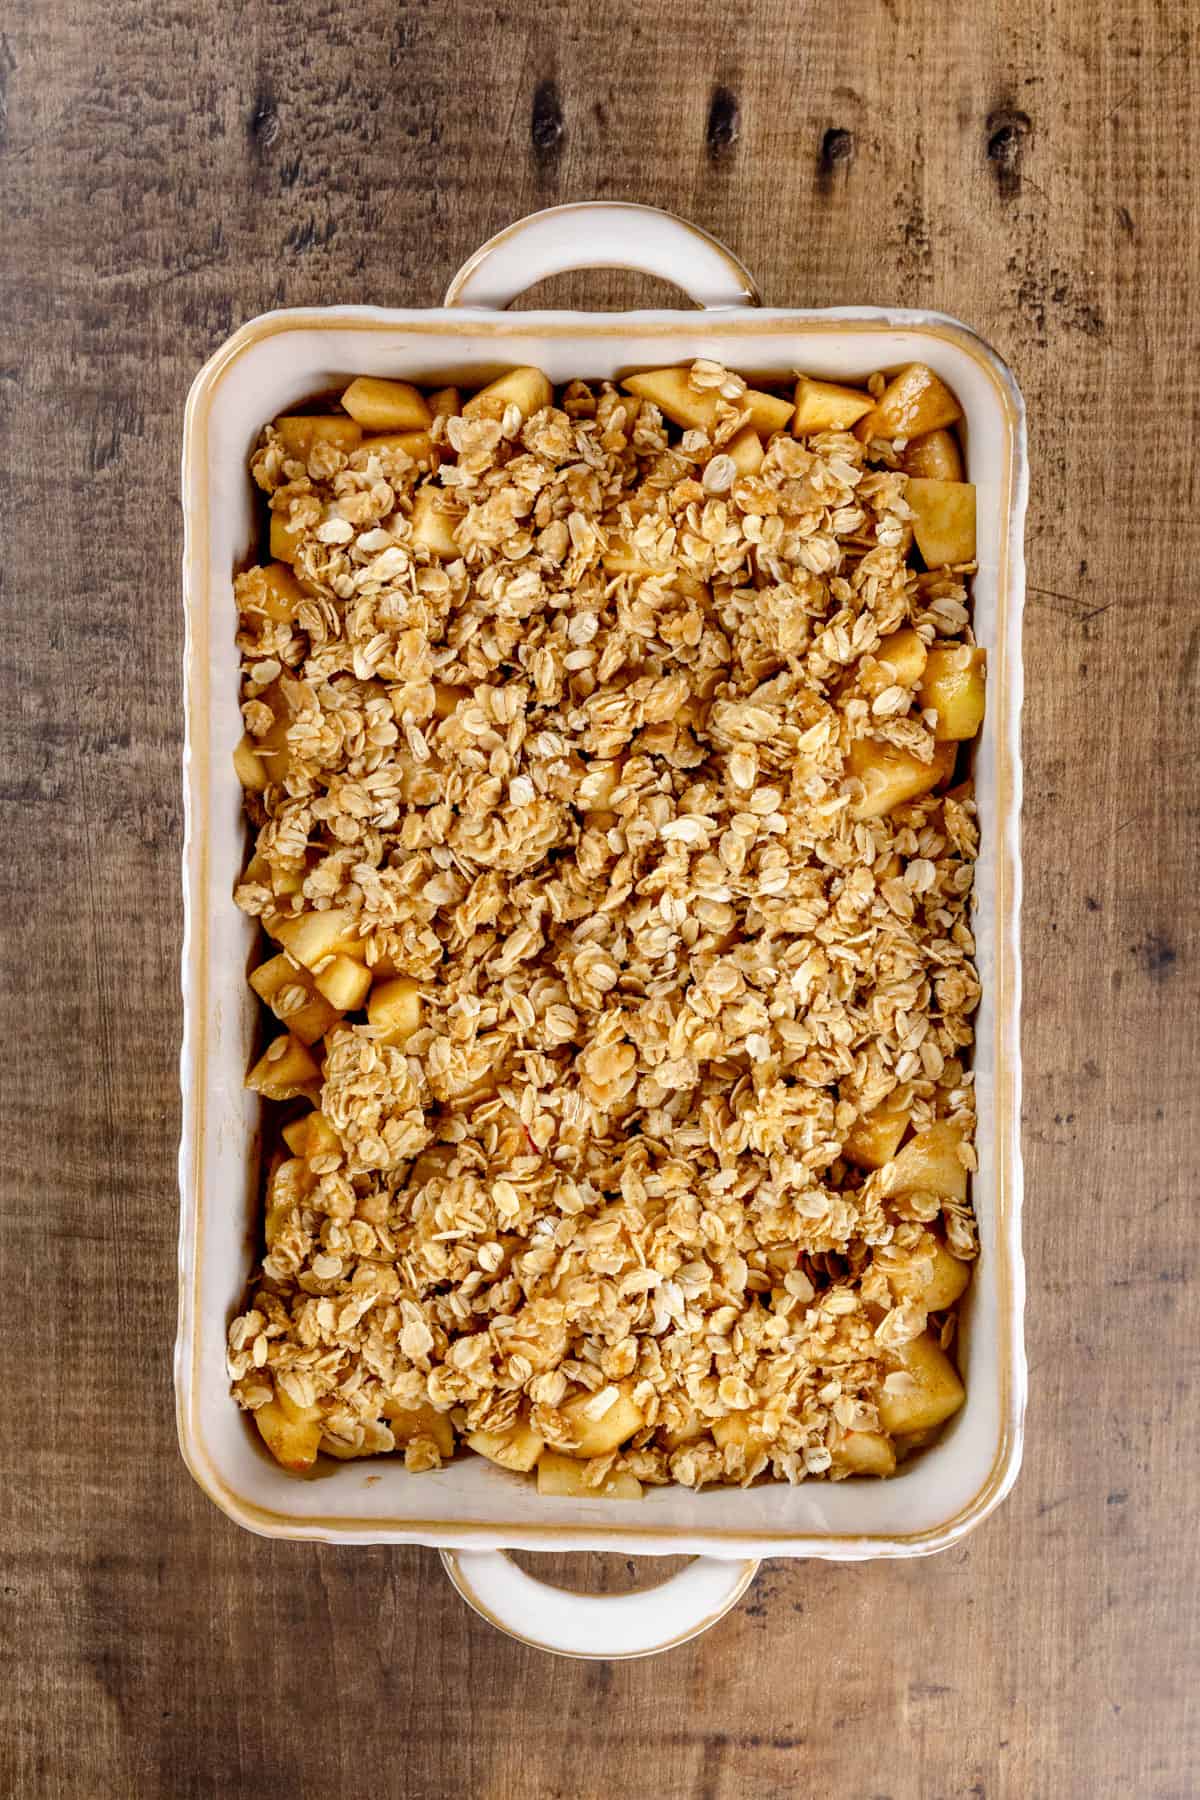 Apple crisp before baking in a ceramic baking dish on a wood table.